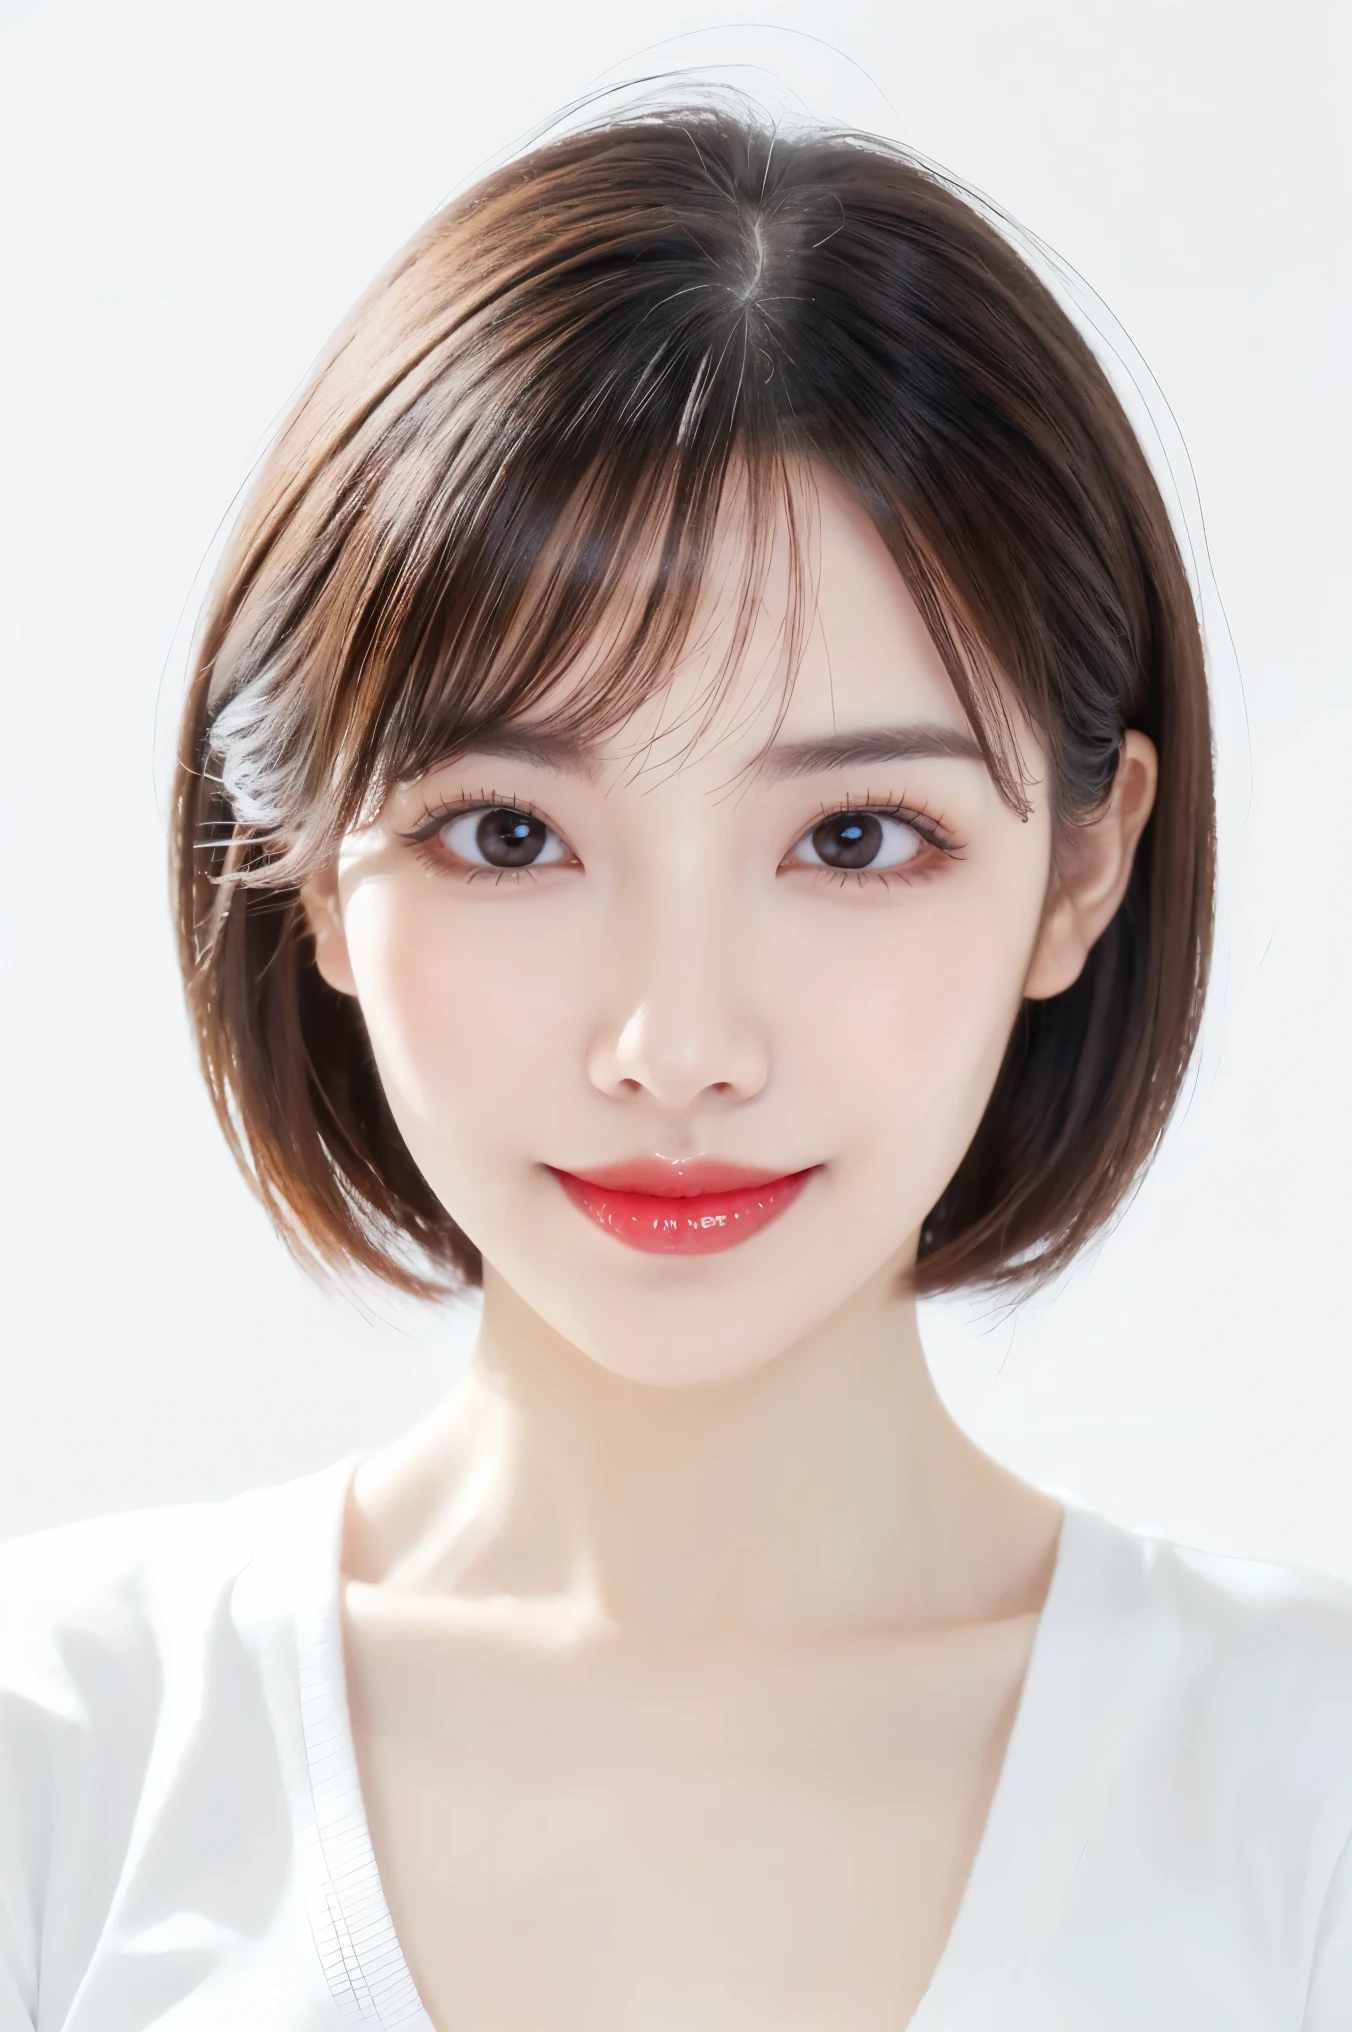 (highest quality、Tabletop、8k、Best image quality、Award-winning works)、Cute beauty、(Short Bob Hair:1.1)、(White fitted V-neck long sleeve knit:1.2)、(Close-fitting V-neck long-sleeve knit:1.1)、(The simplest pure white background:1.6)、(Face close-up:1.3)、(Very large breasts:1.1)、Accentuate your body lines、Beautiful and exquisite、Look at me and smile、(look straight at me:1.1)、(Perfect Makeup:1.1)、Bright lipstick、Ultra-high definition beauty face、Ultra HD Hair、Ultra HD Shining Eyes、Ultra High Resolution Perfect Teeth、Super high quality glossy lip、Accurate anatomy、Very beautiful skin、Pure white skin shining in ultra-high resolution、An elegant upright posture when viewed from the front、(Very bright:1.2)